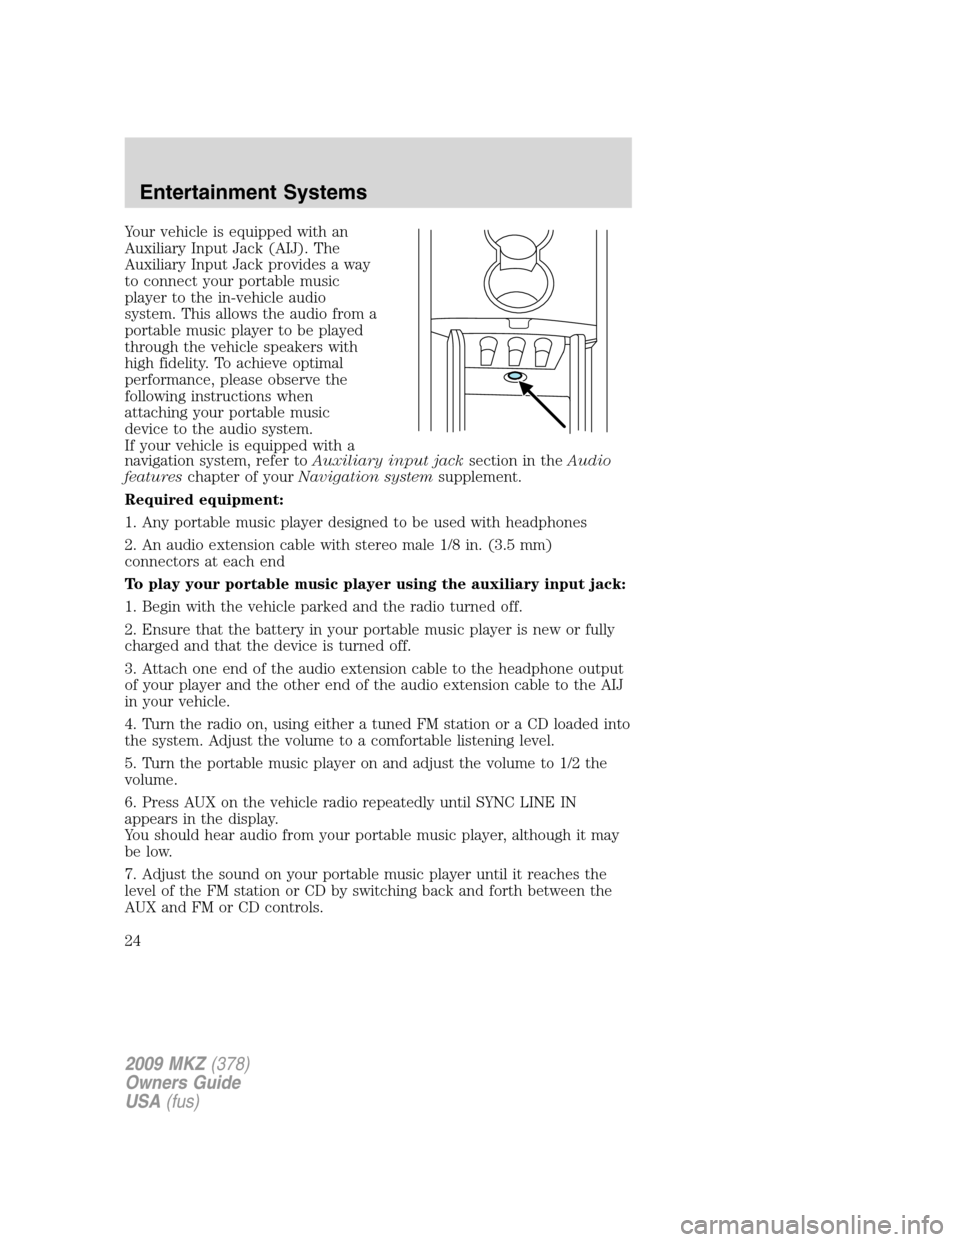 LINCOLN MKZ 2009  Owners Manual Your vehicle is equipped with an
Auxiliary Input Jack (AIJ). The
Auxiliary Input Jack provides a way
to connect your portable music
player to the in-vehicle audio
system. This allows the audio from a
